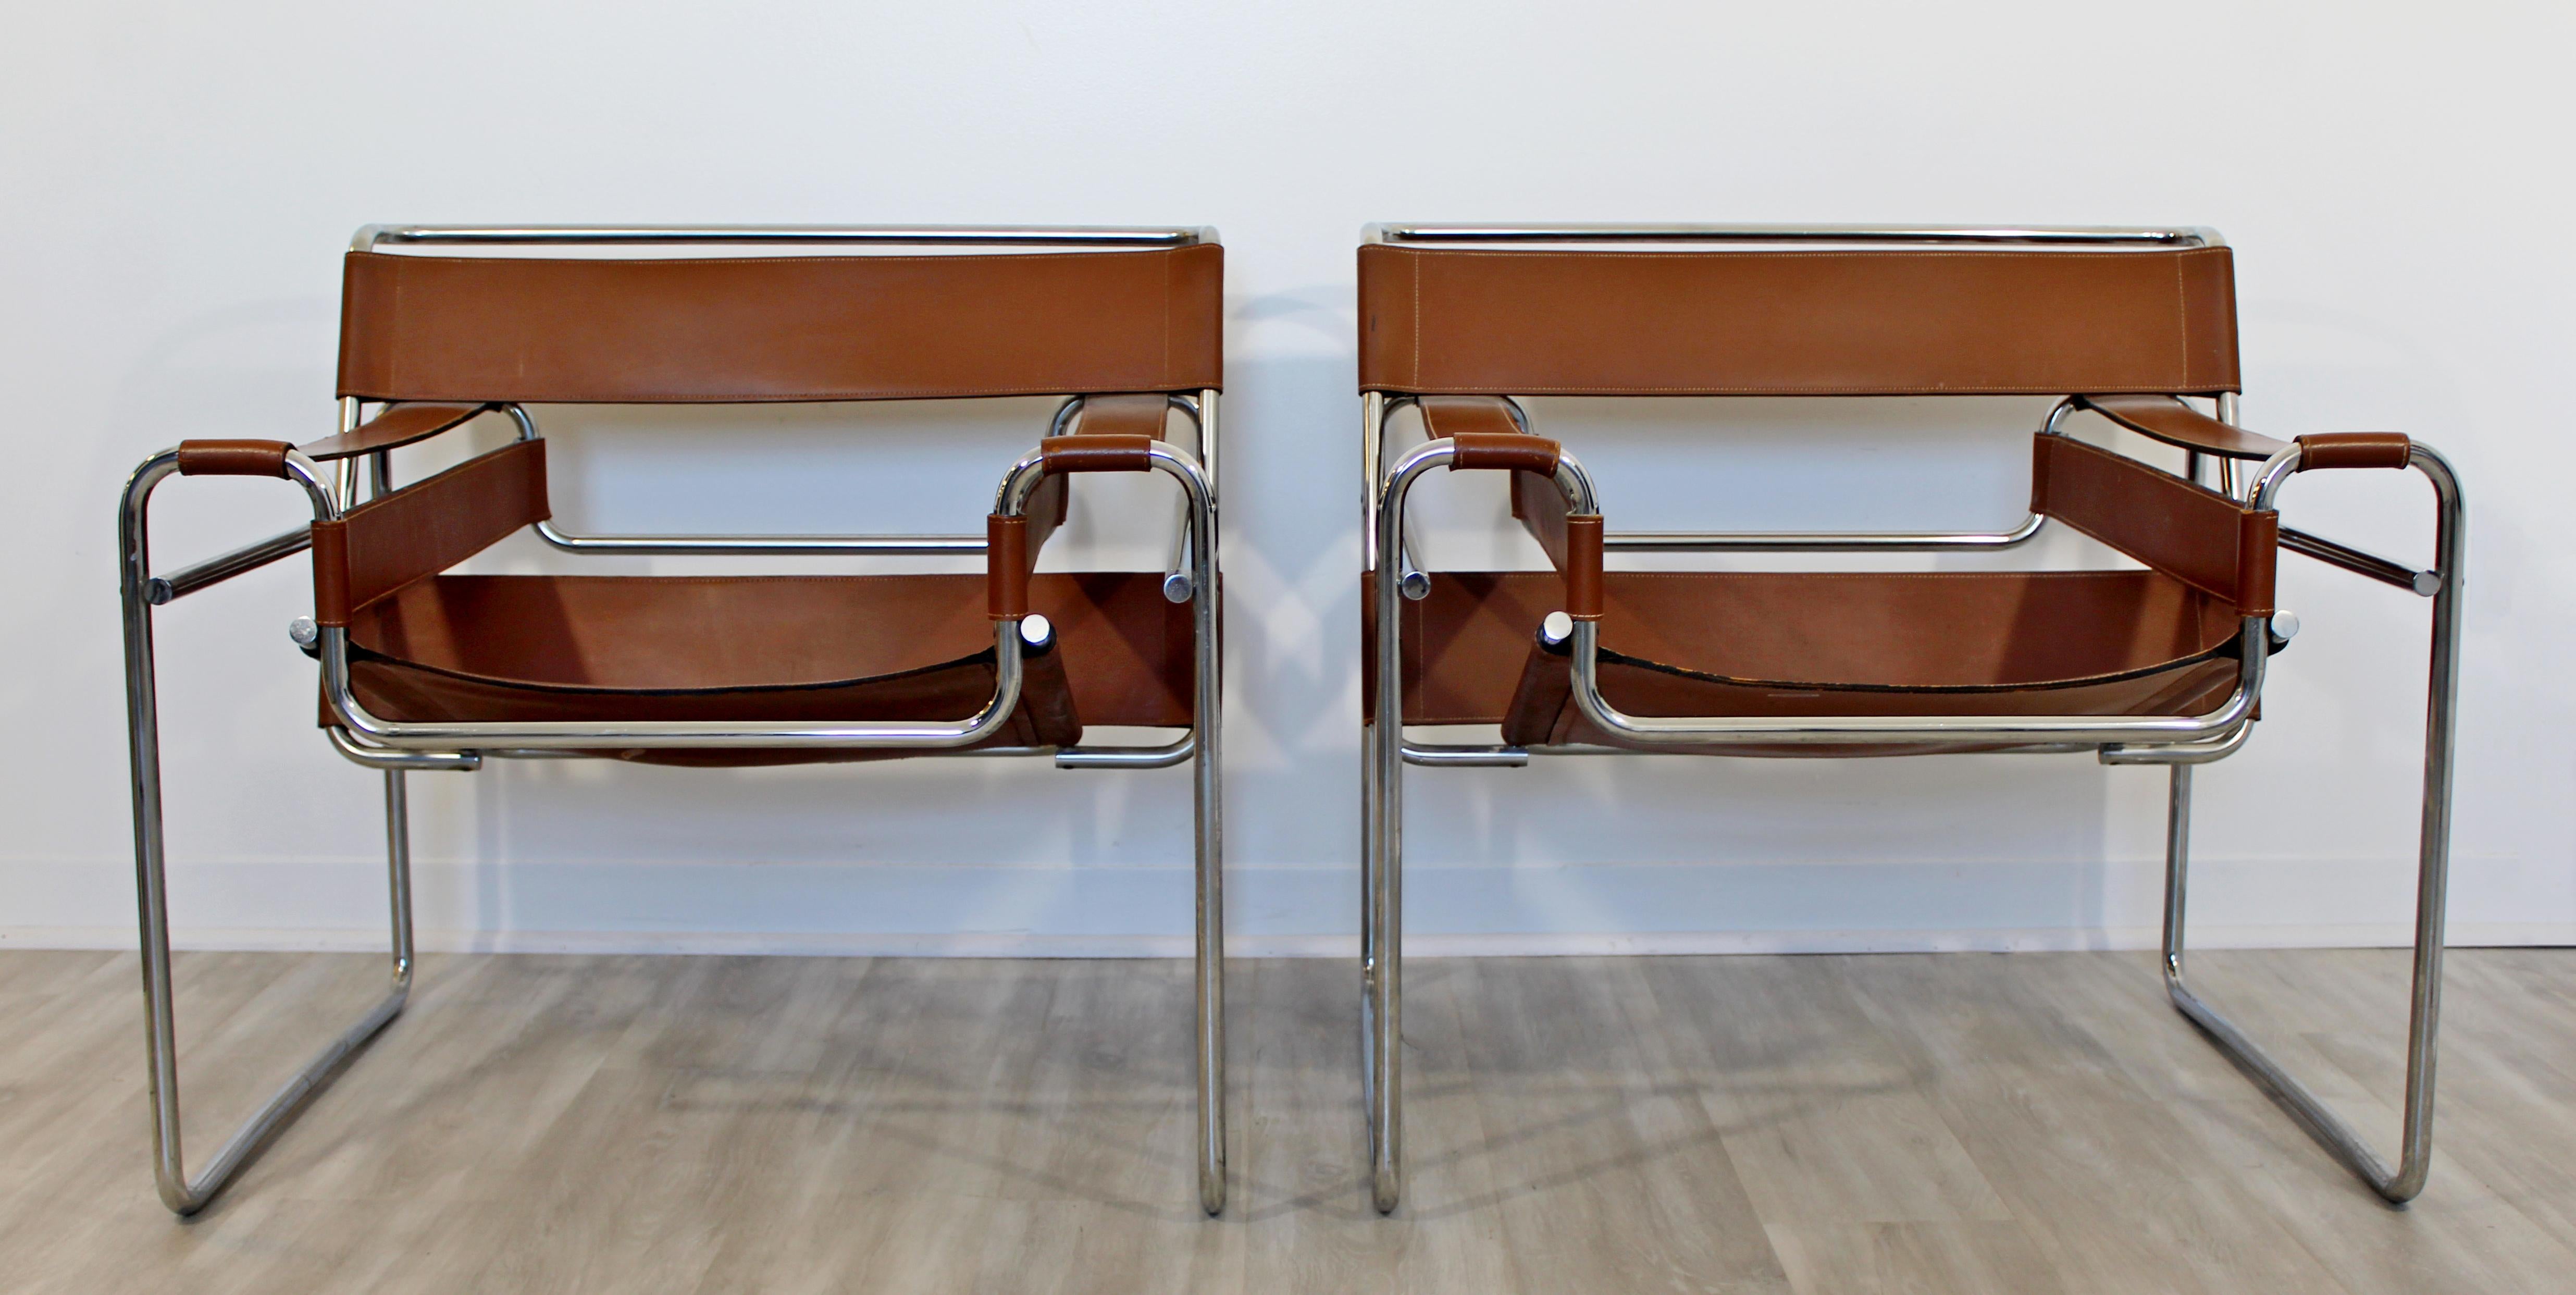 For your consideration is a marvelous, early pair of chrome and brown leather Wassily armchairs, by Marcel Breuer for Stendig Italy, circa 1950s. In very good vintage condition. The dimensions are 30.5